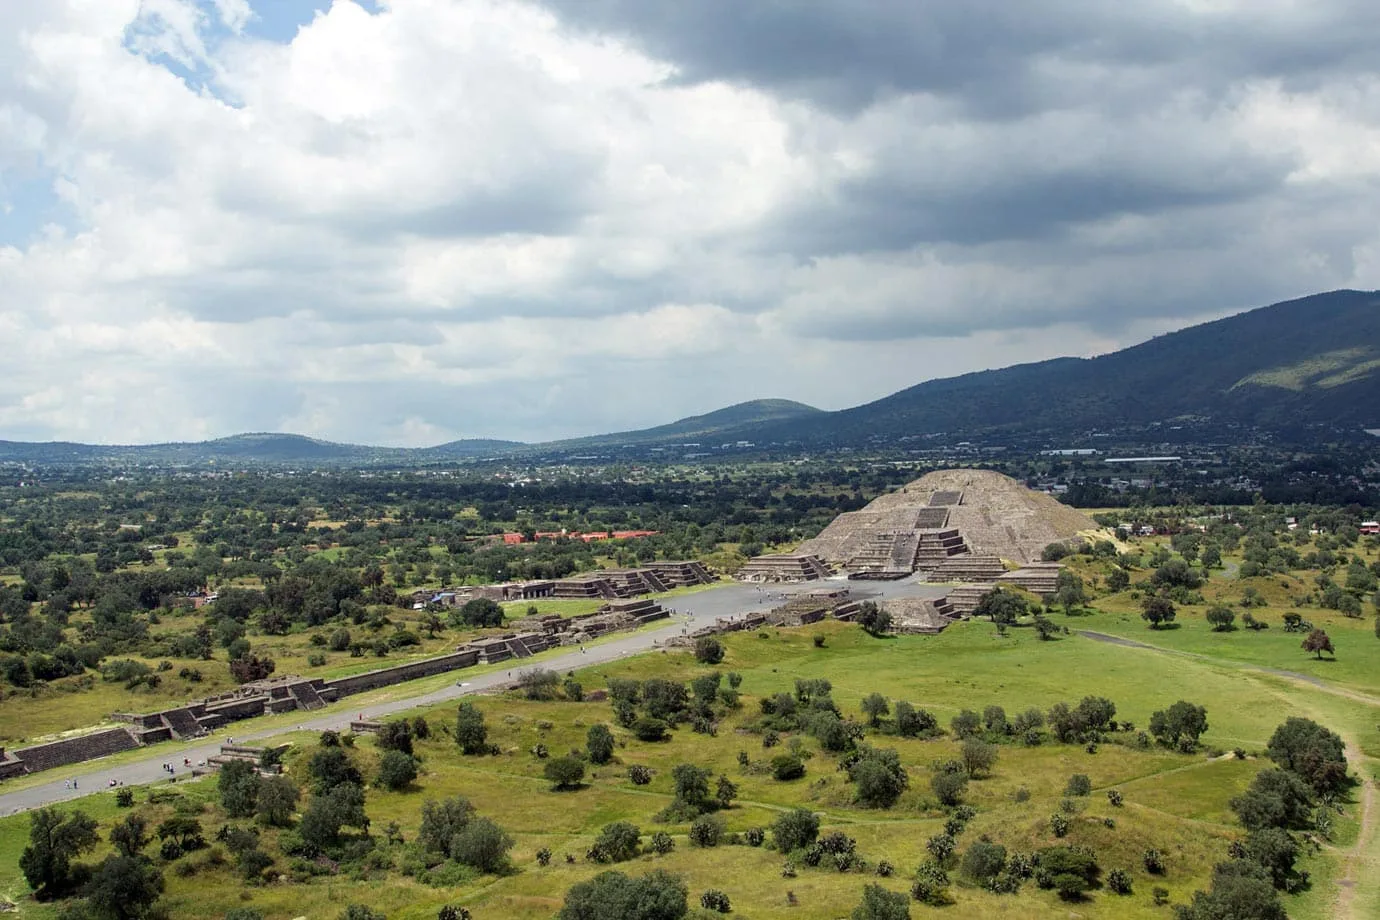 Teotihuacán was once the largest Pre-Colombia city in all of the Americas